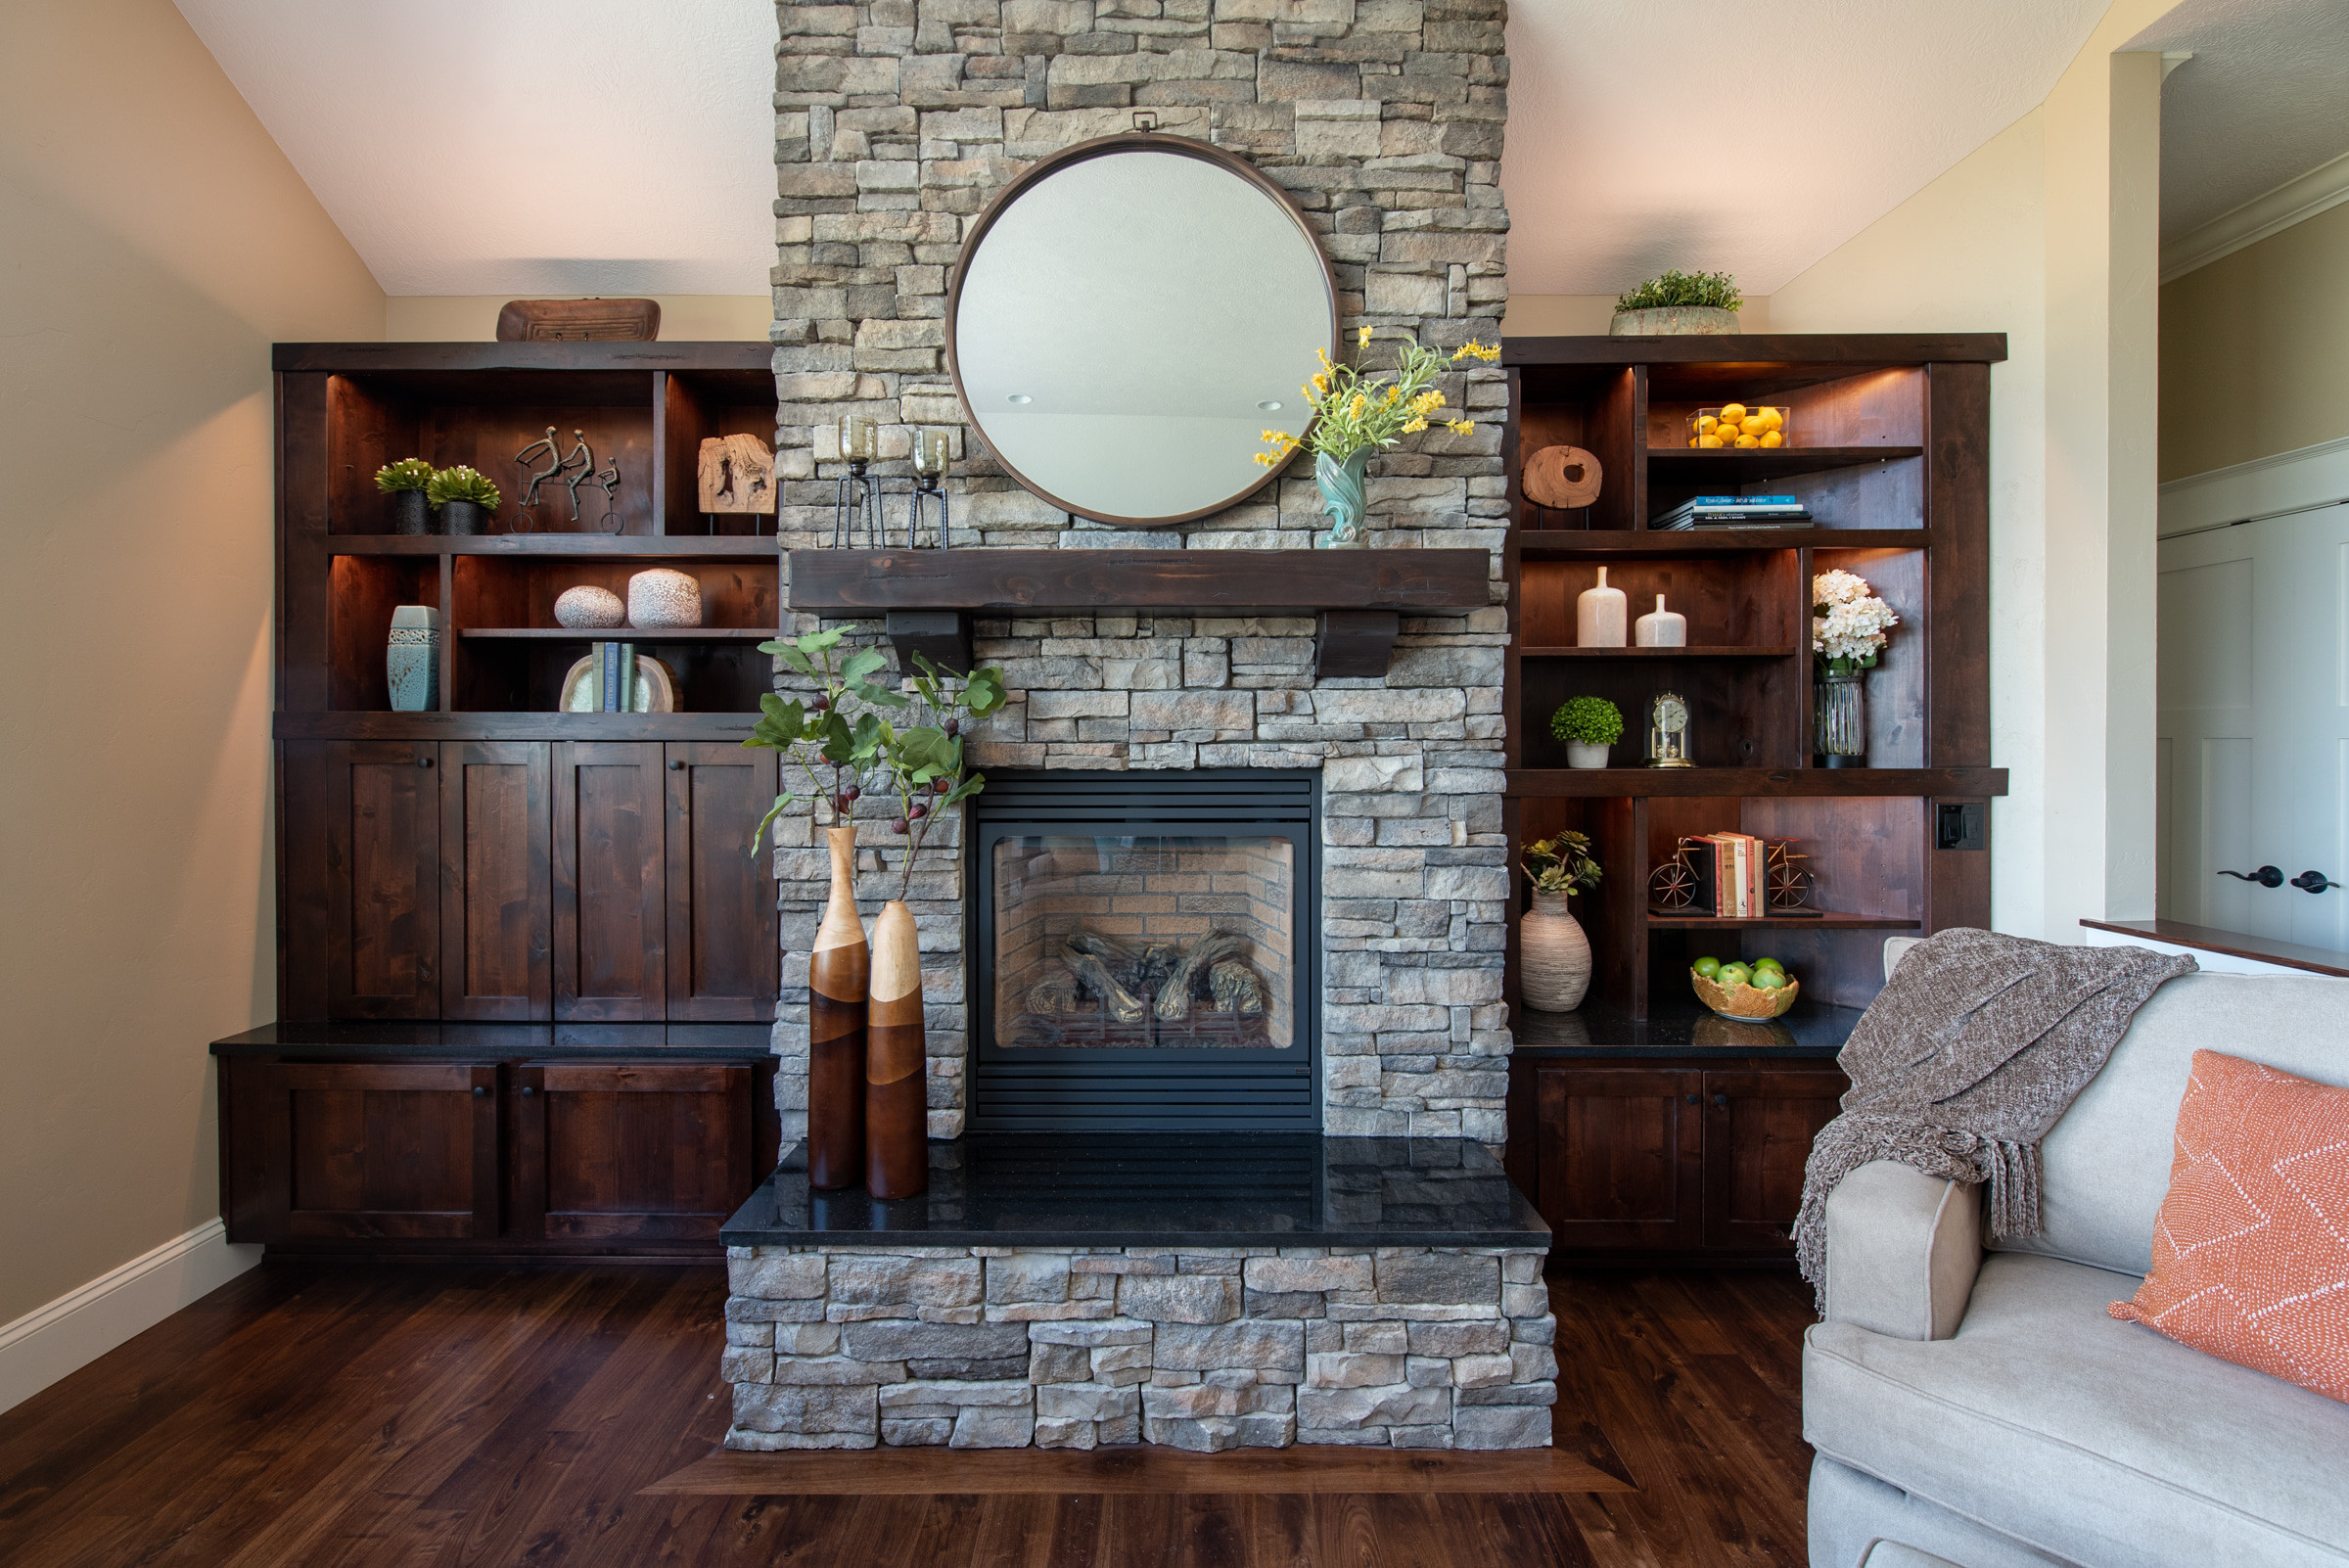 Custom Woodwork, Cabinets with Granite Countertops and Fireplace Hearth